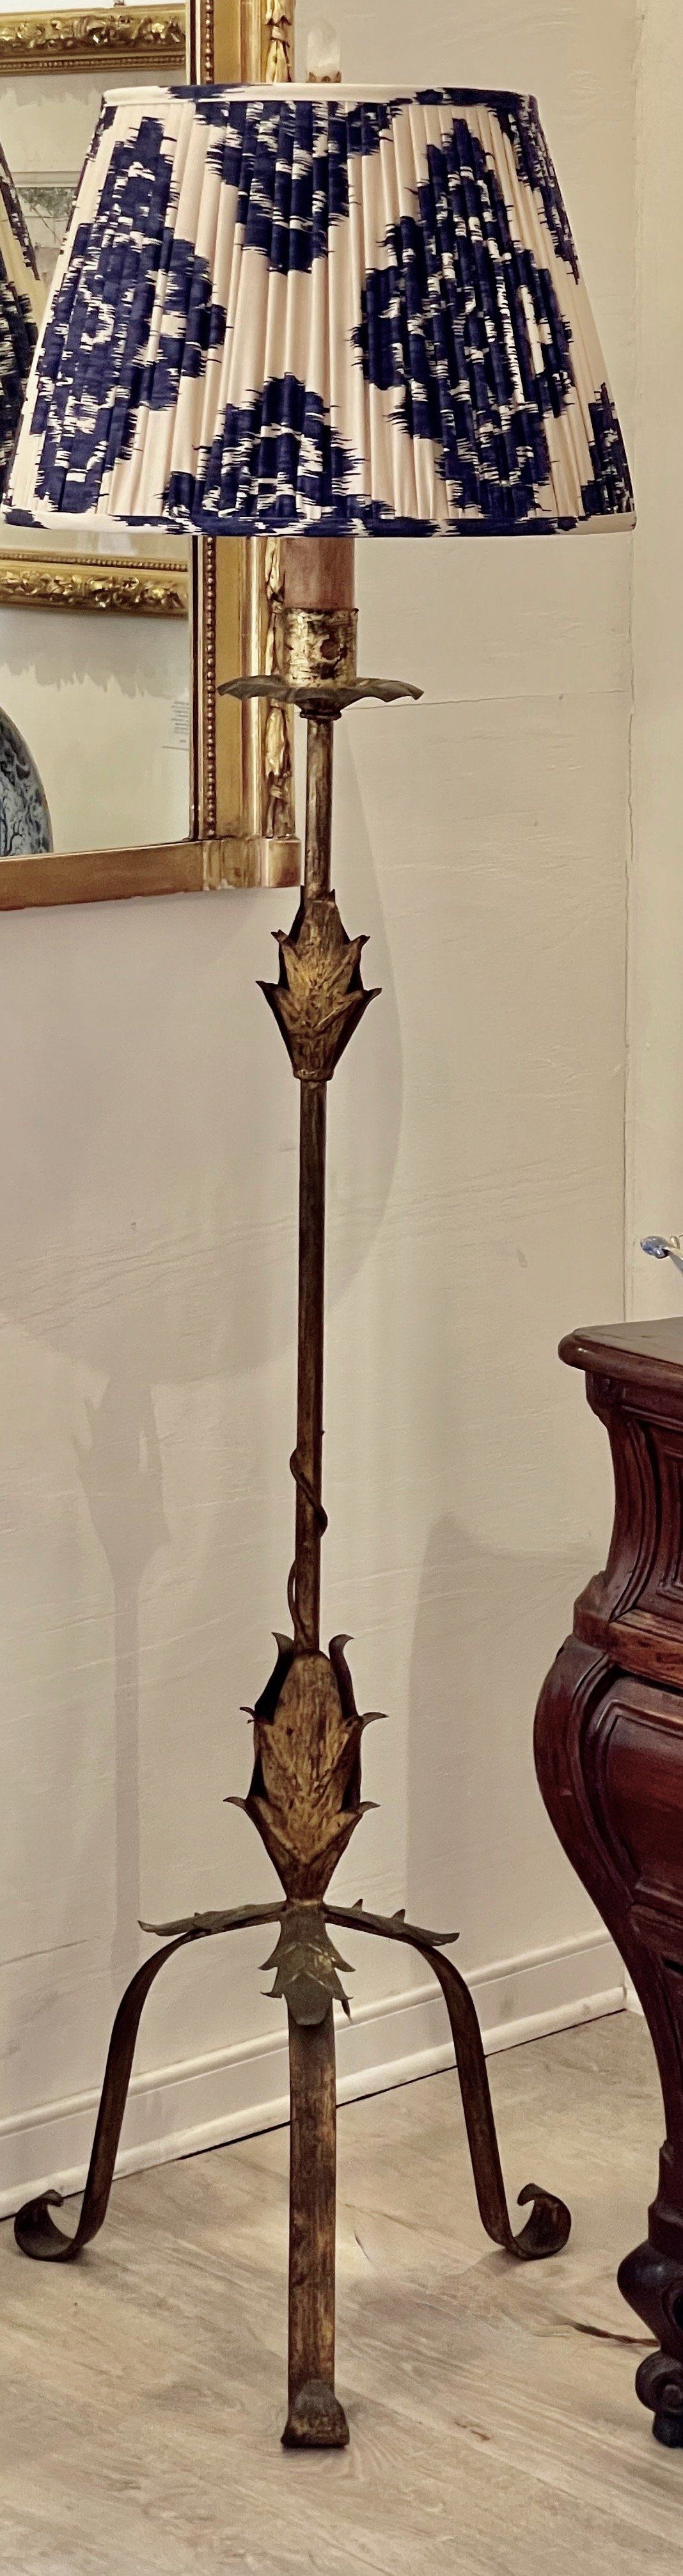 Doodskaak Vulkaan Lach VINTAGE FRENCH TOLE FLOOR LAMP WITH SHADE - Helen Storey Antiques